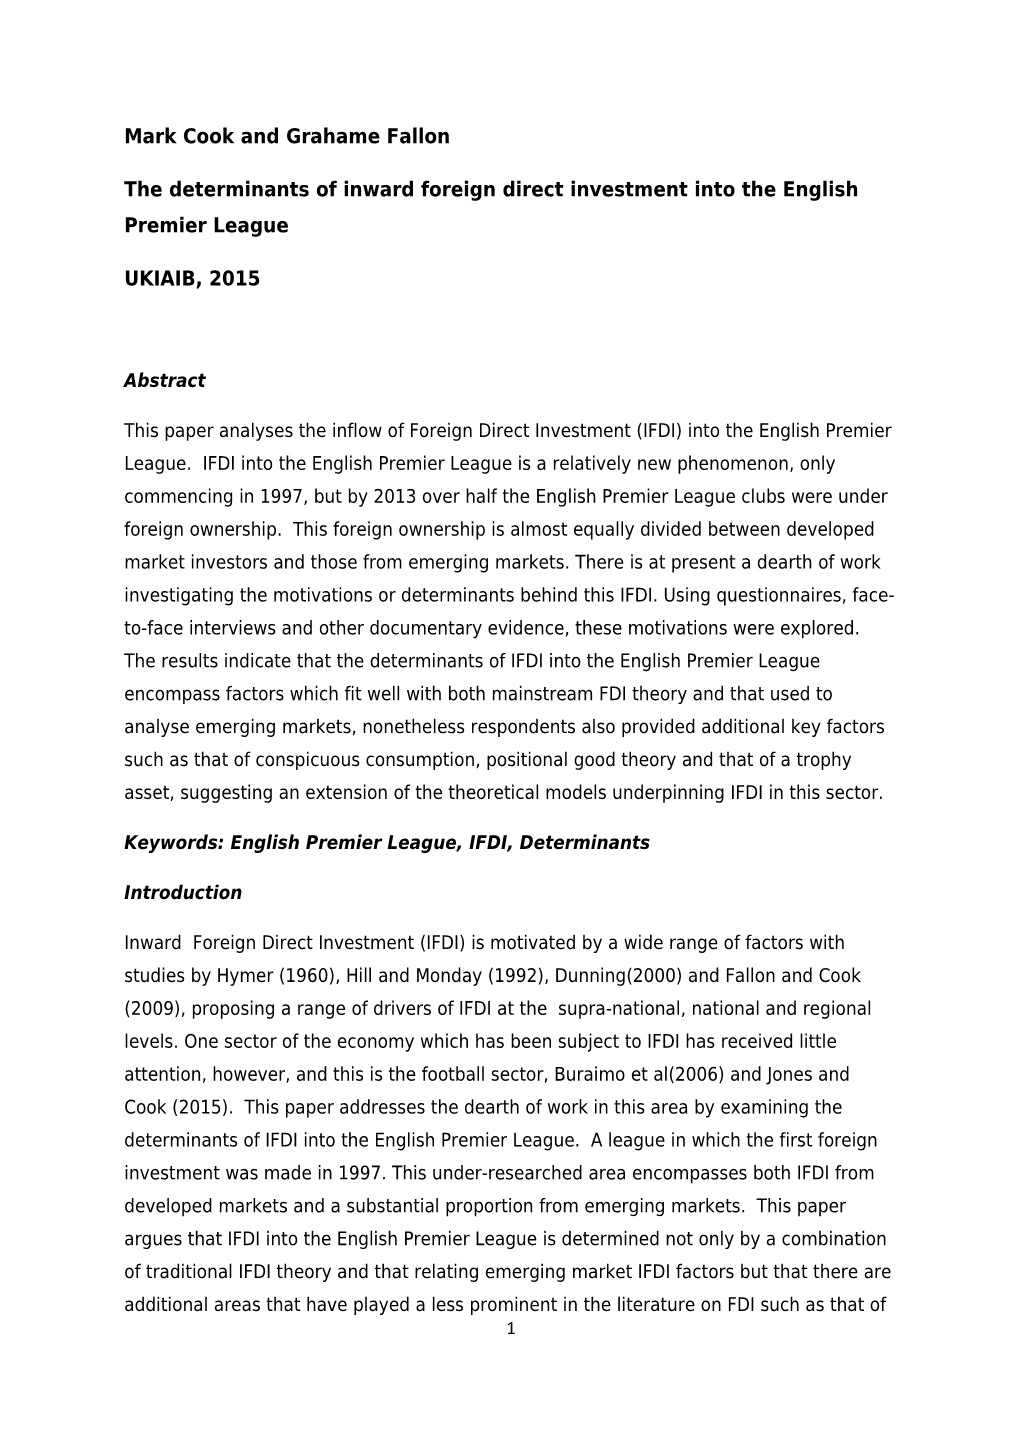 The Determinants of Inward Foreign Direct Investment Into the English Premier League